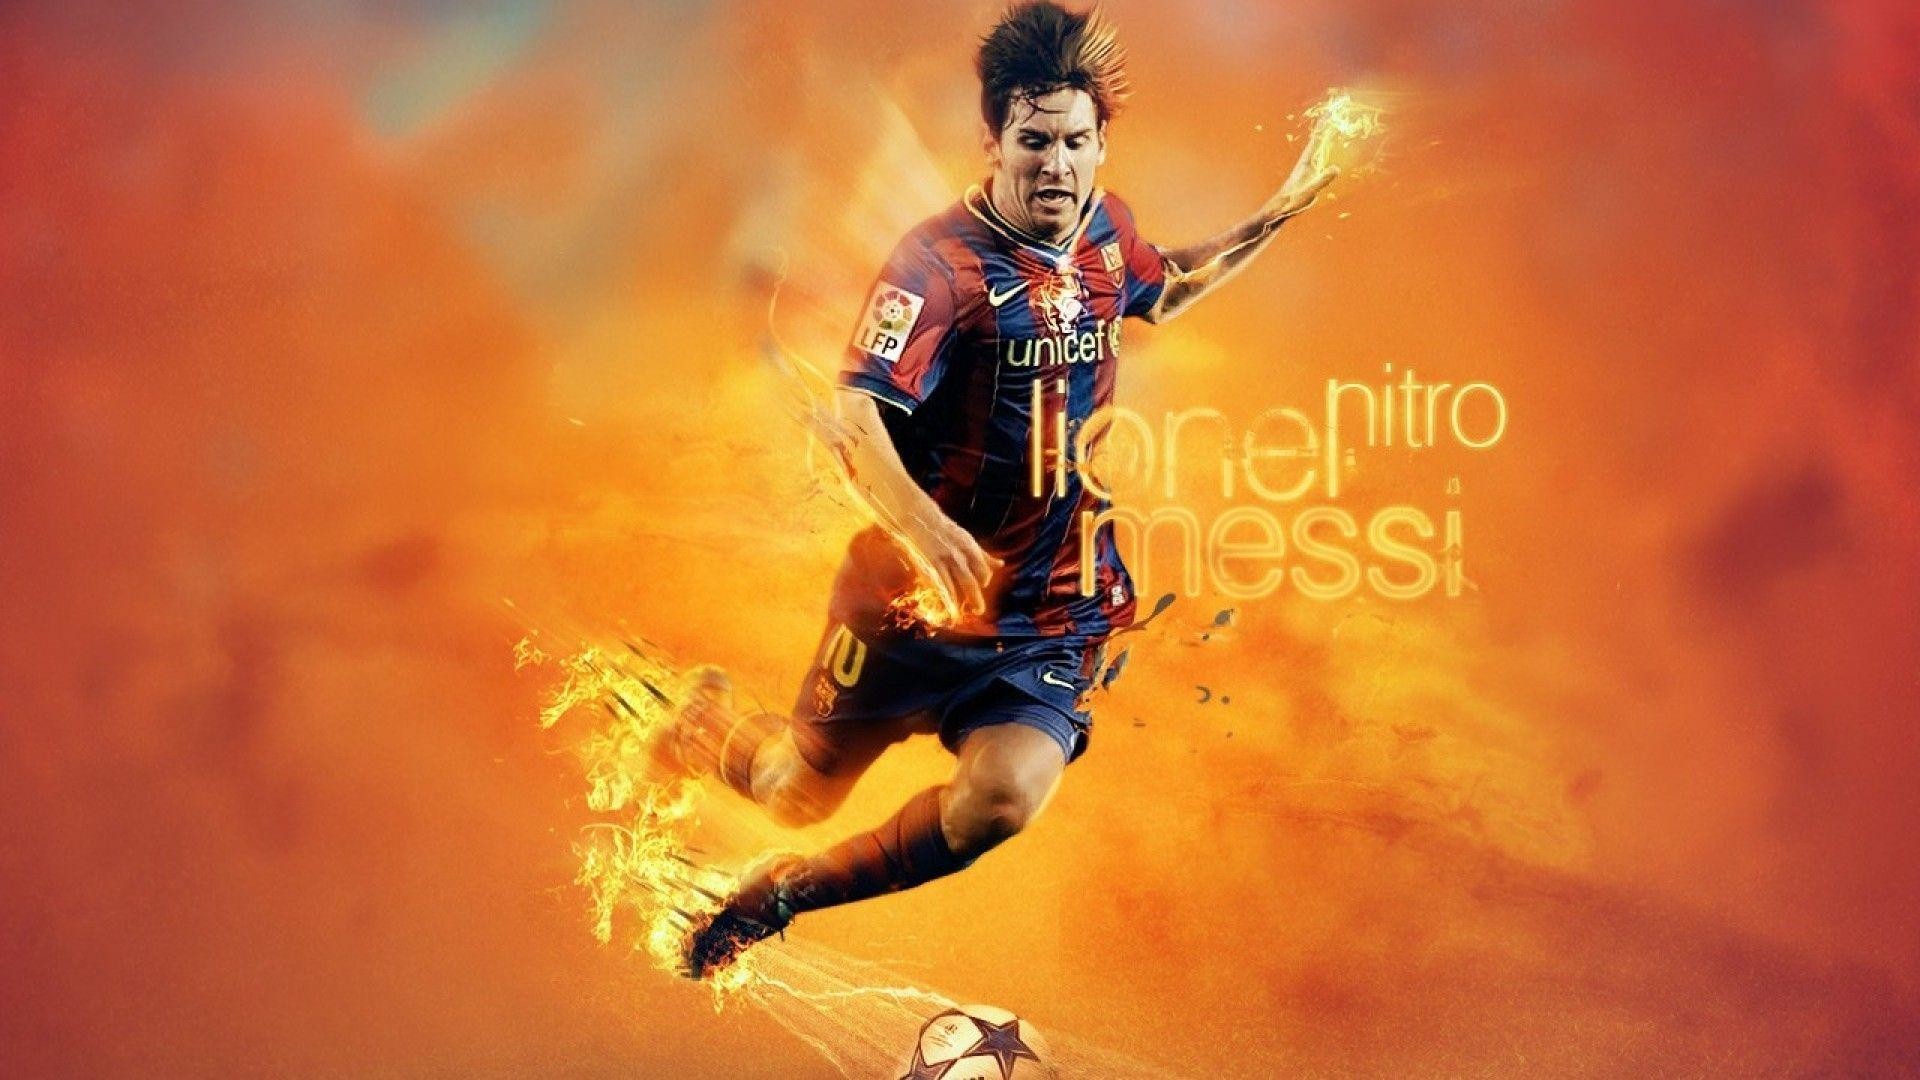 1920x1080 Free Download 40 Lionel Messi HD Wallpapers